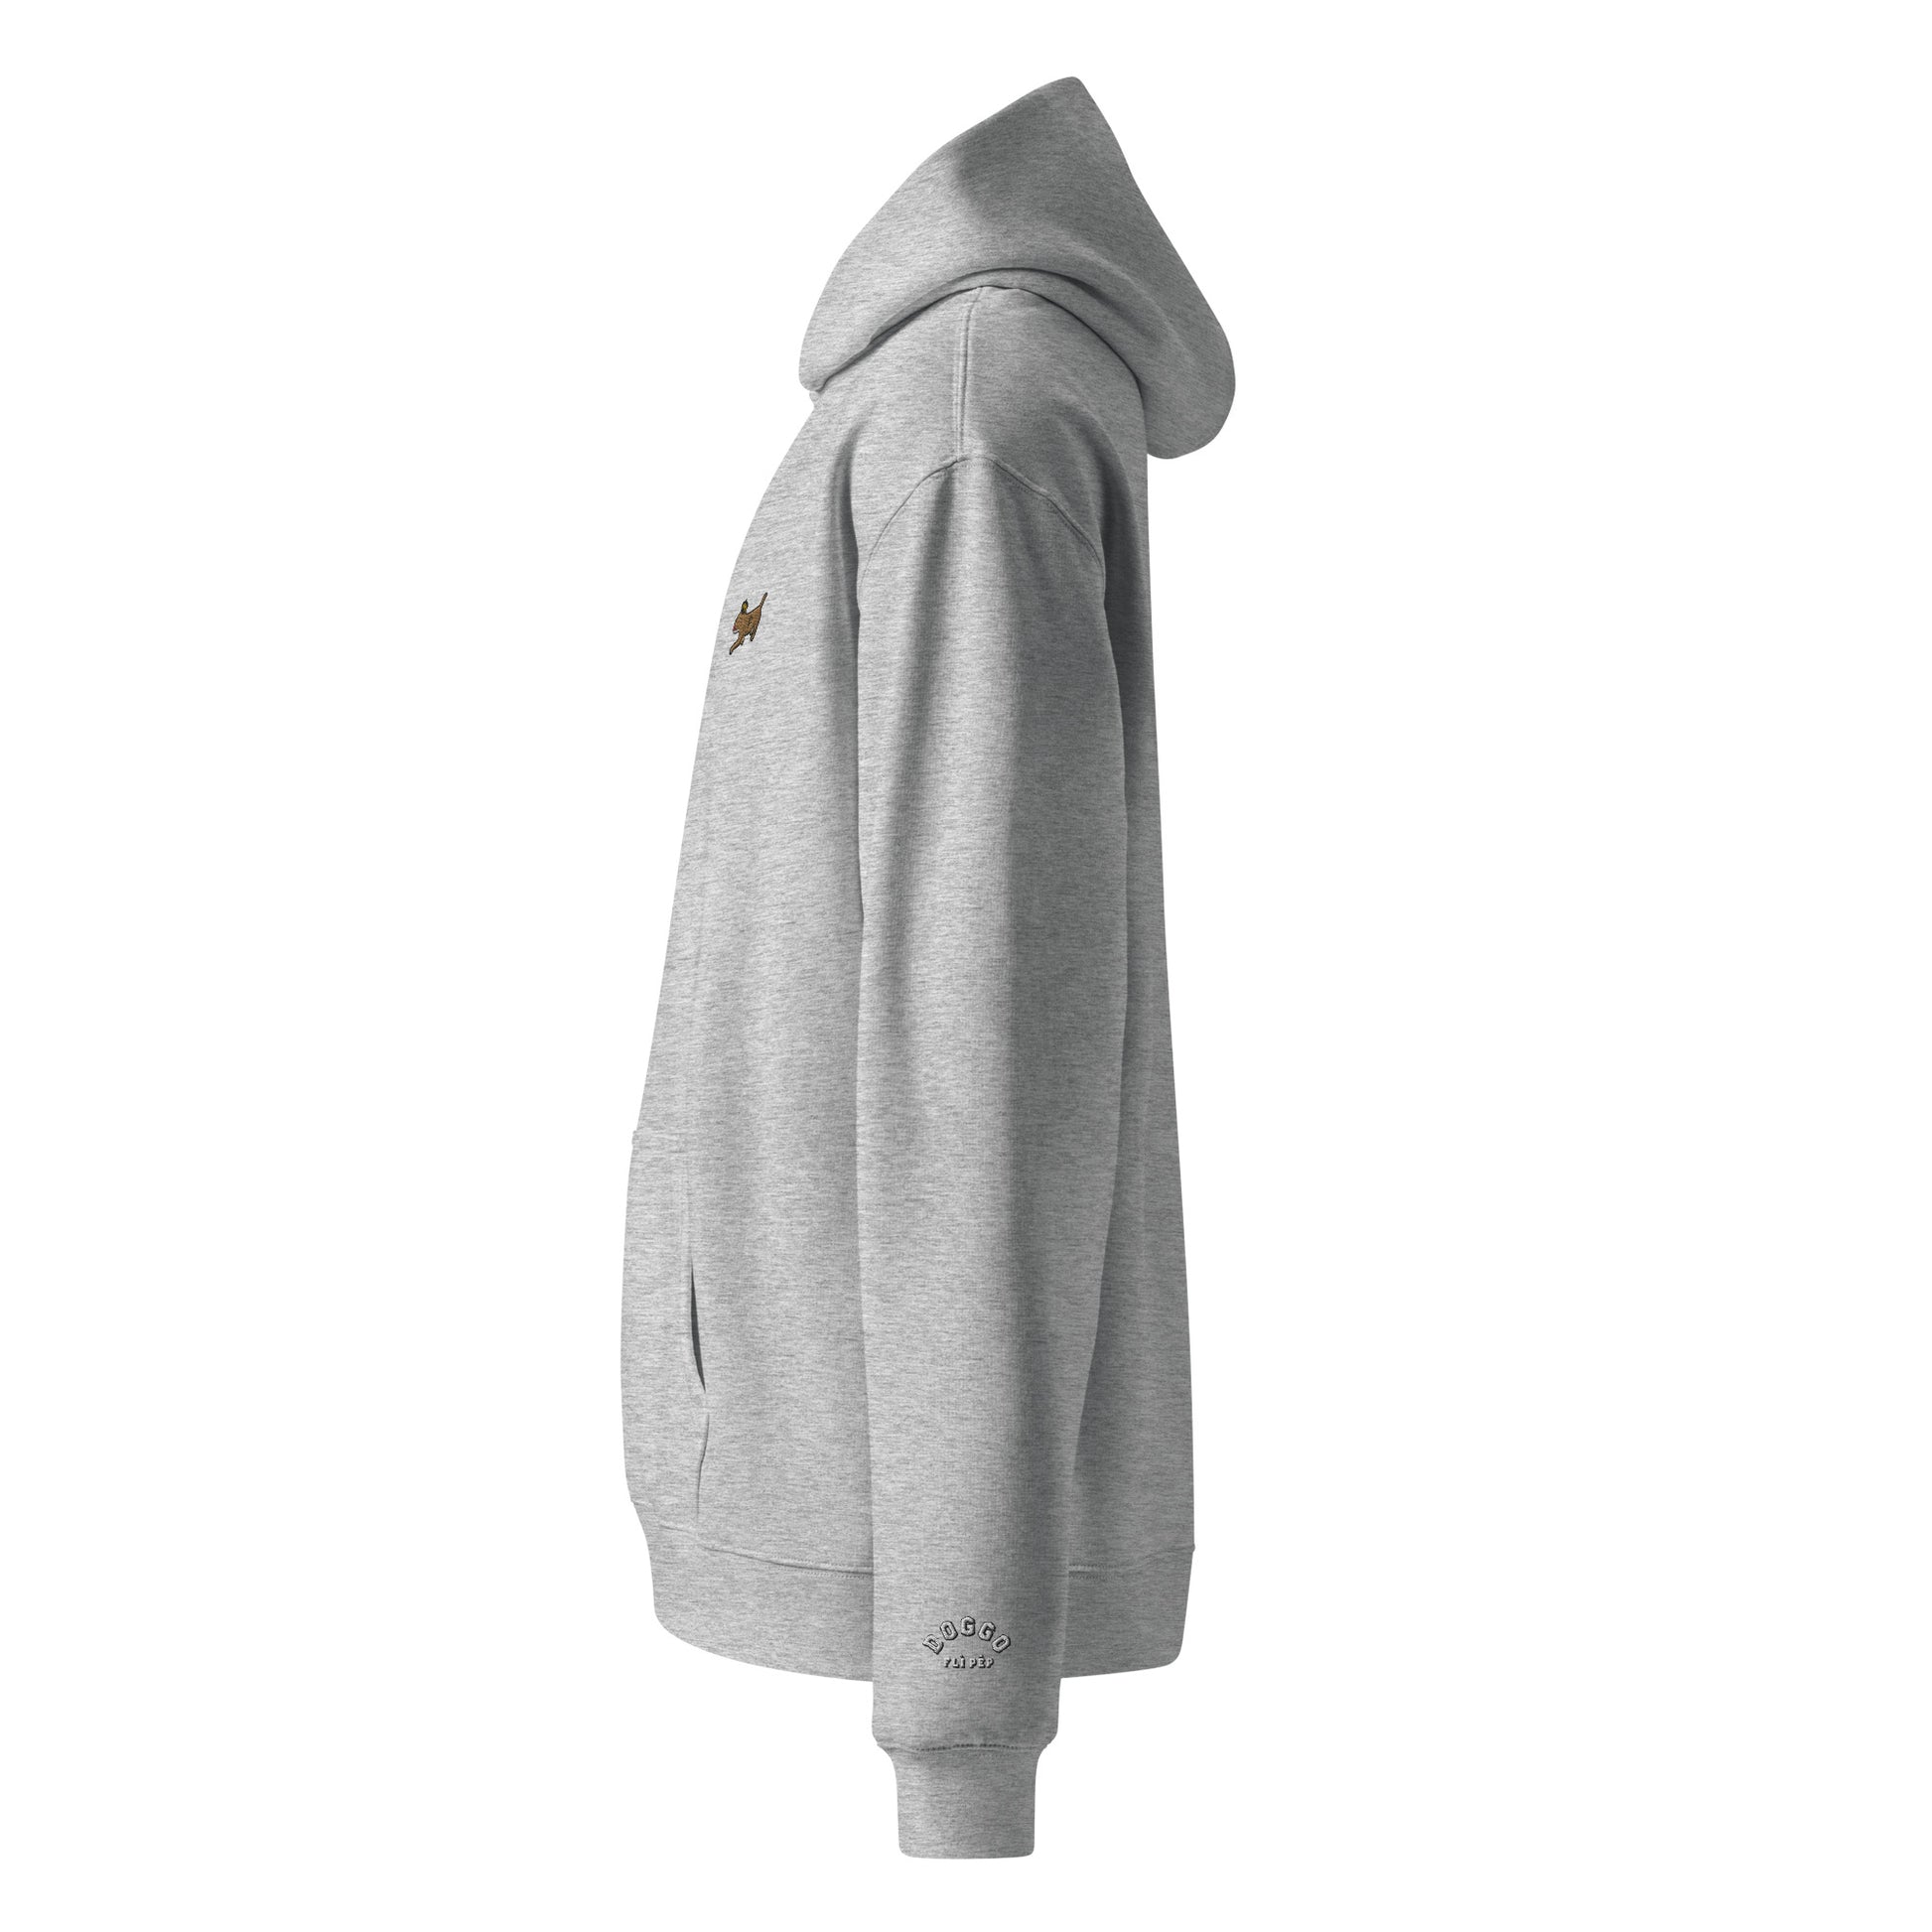 Doggo Puppy Relaxed Fit Oversized Hoodie - FLÌ PÊP™